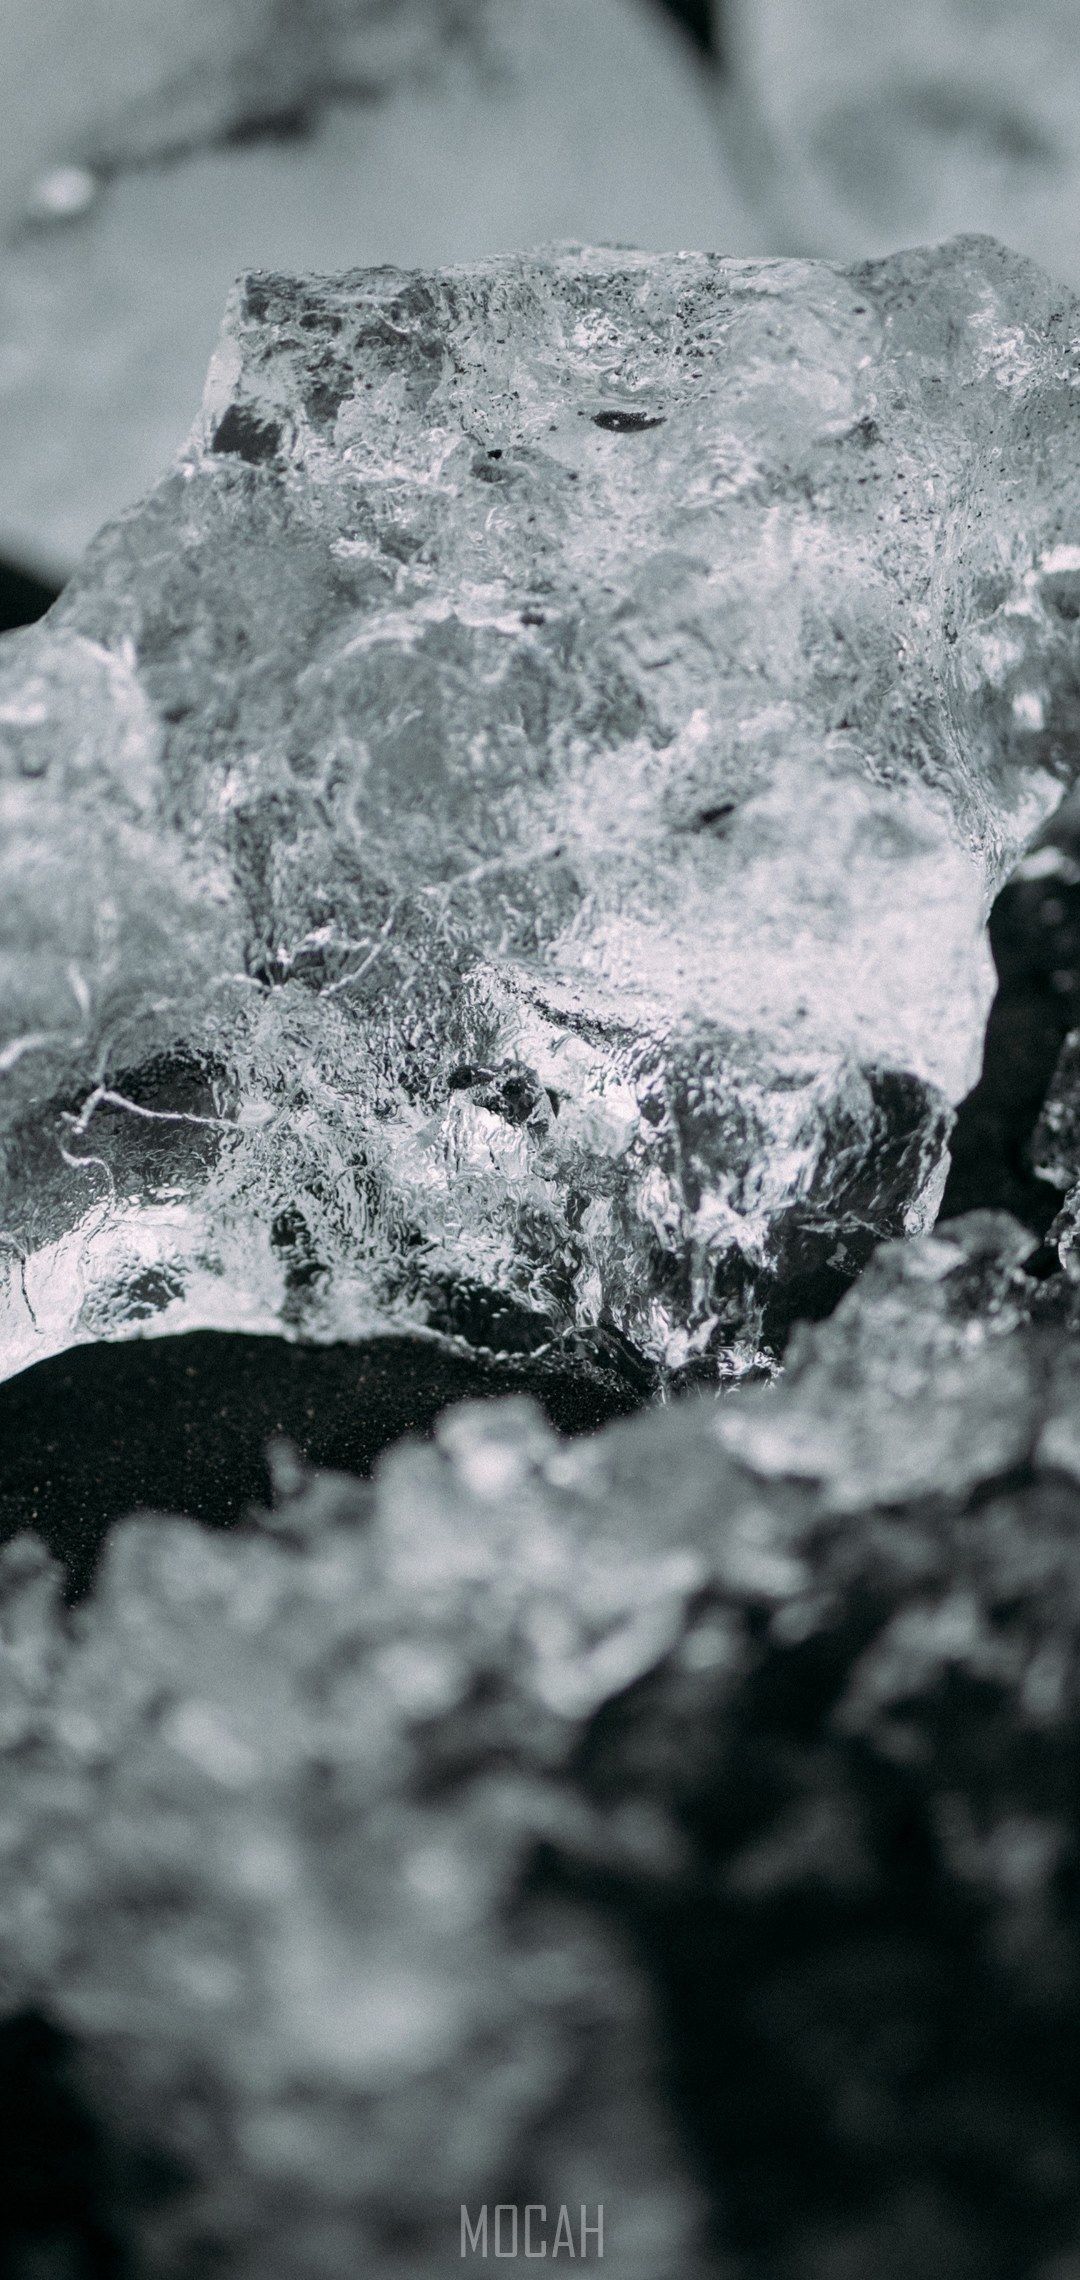 A close up of a chunk of ice. - Ice